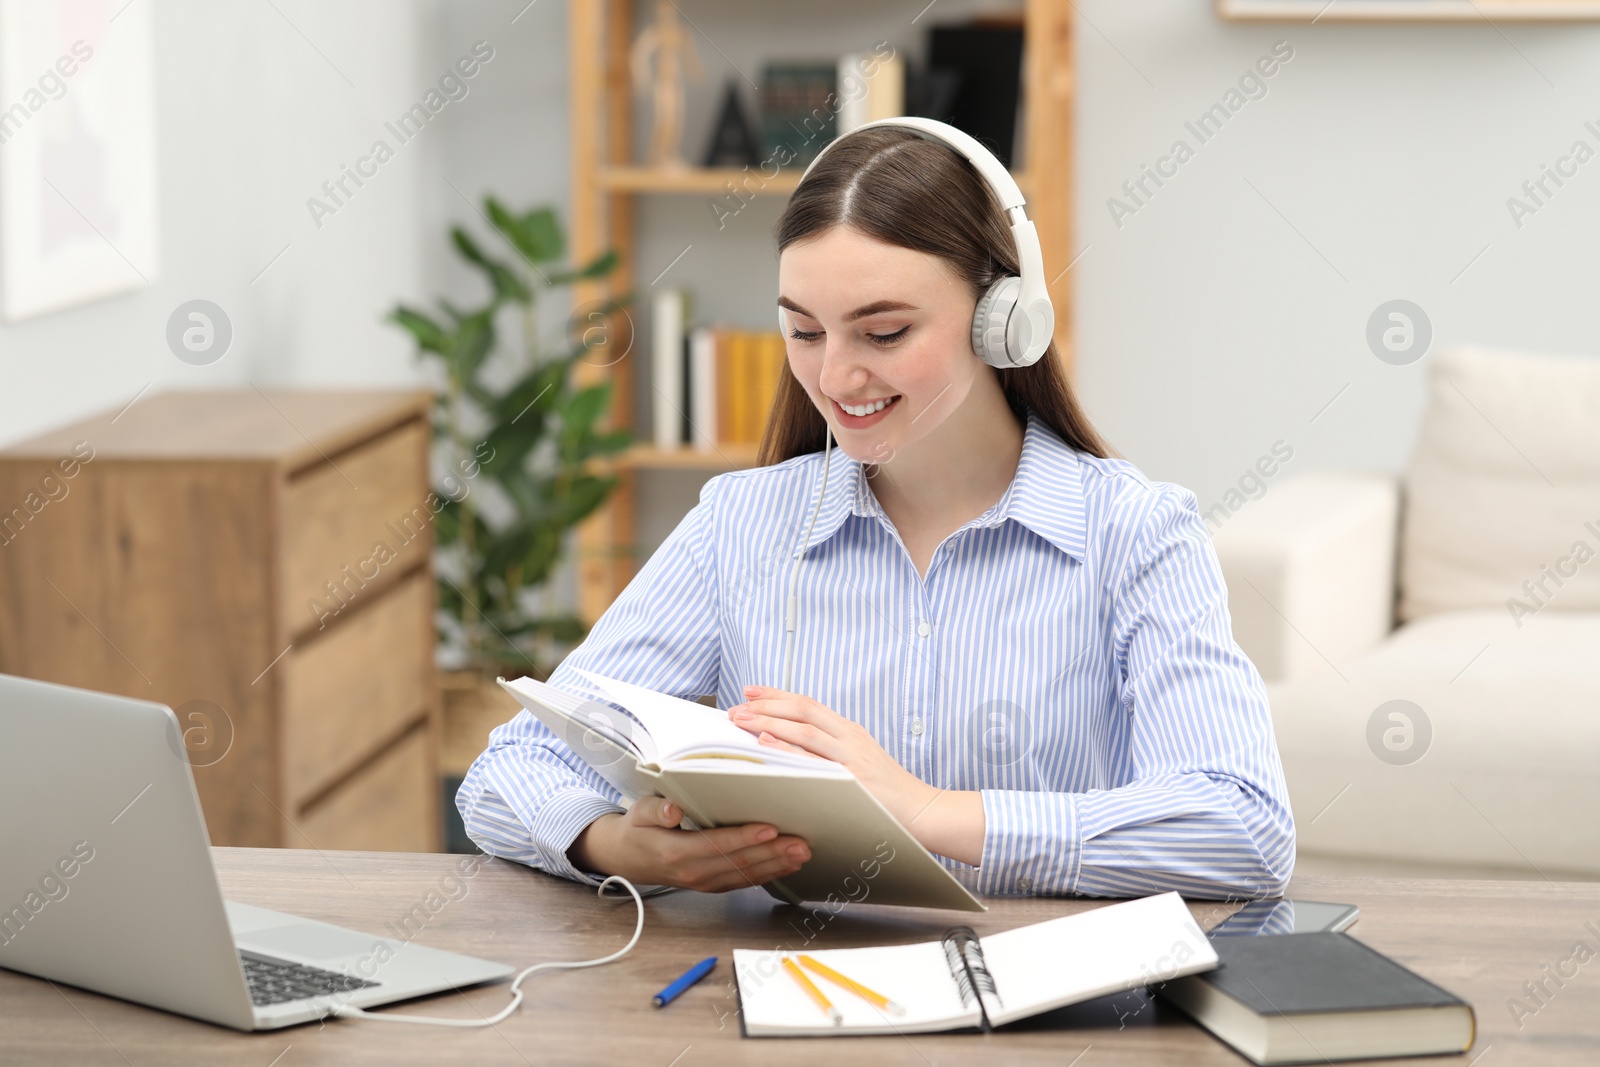 Photo of E-learning. Young woman with book during online lesson at table indoors